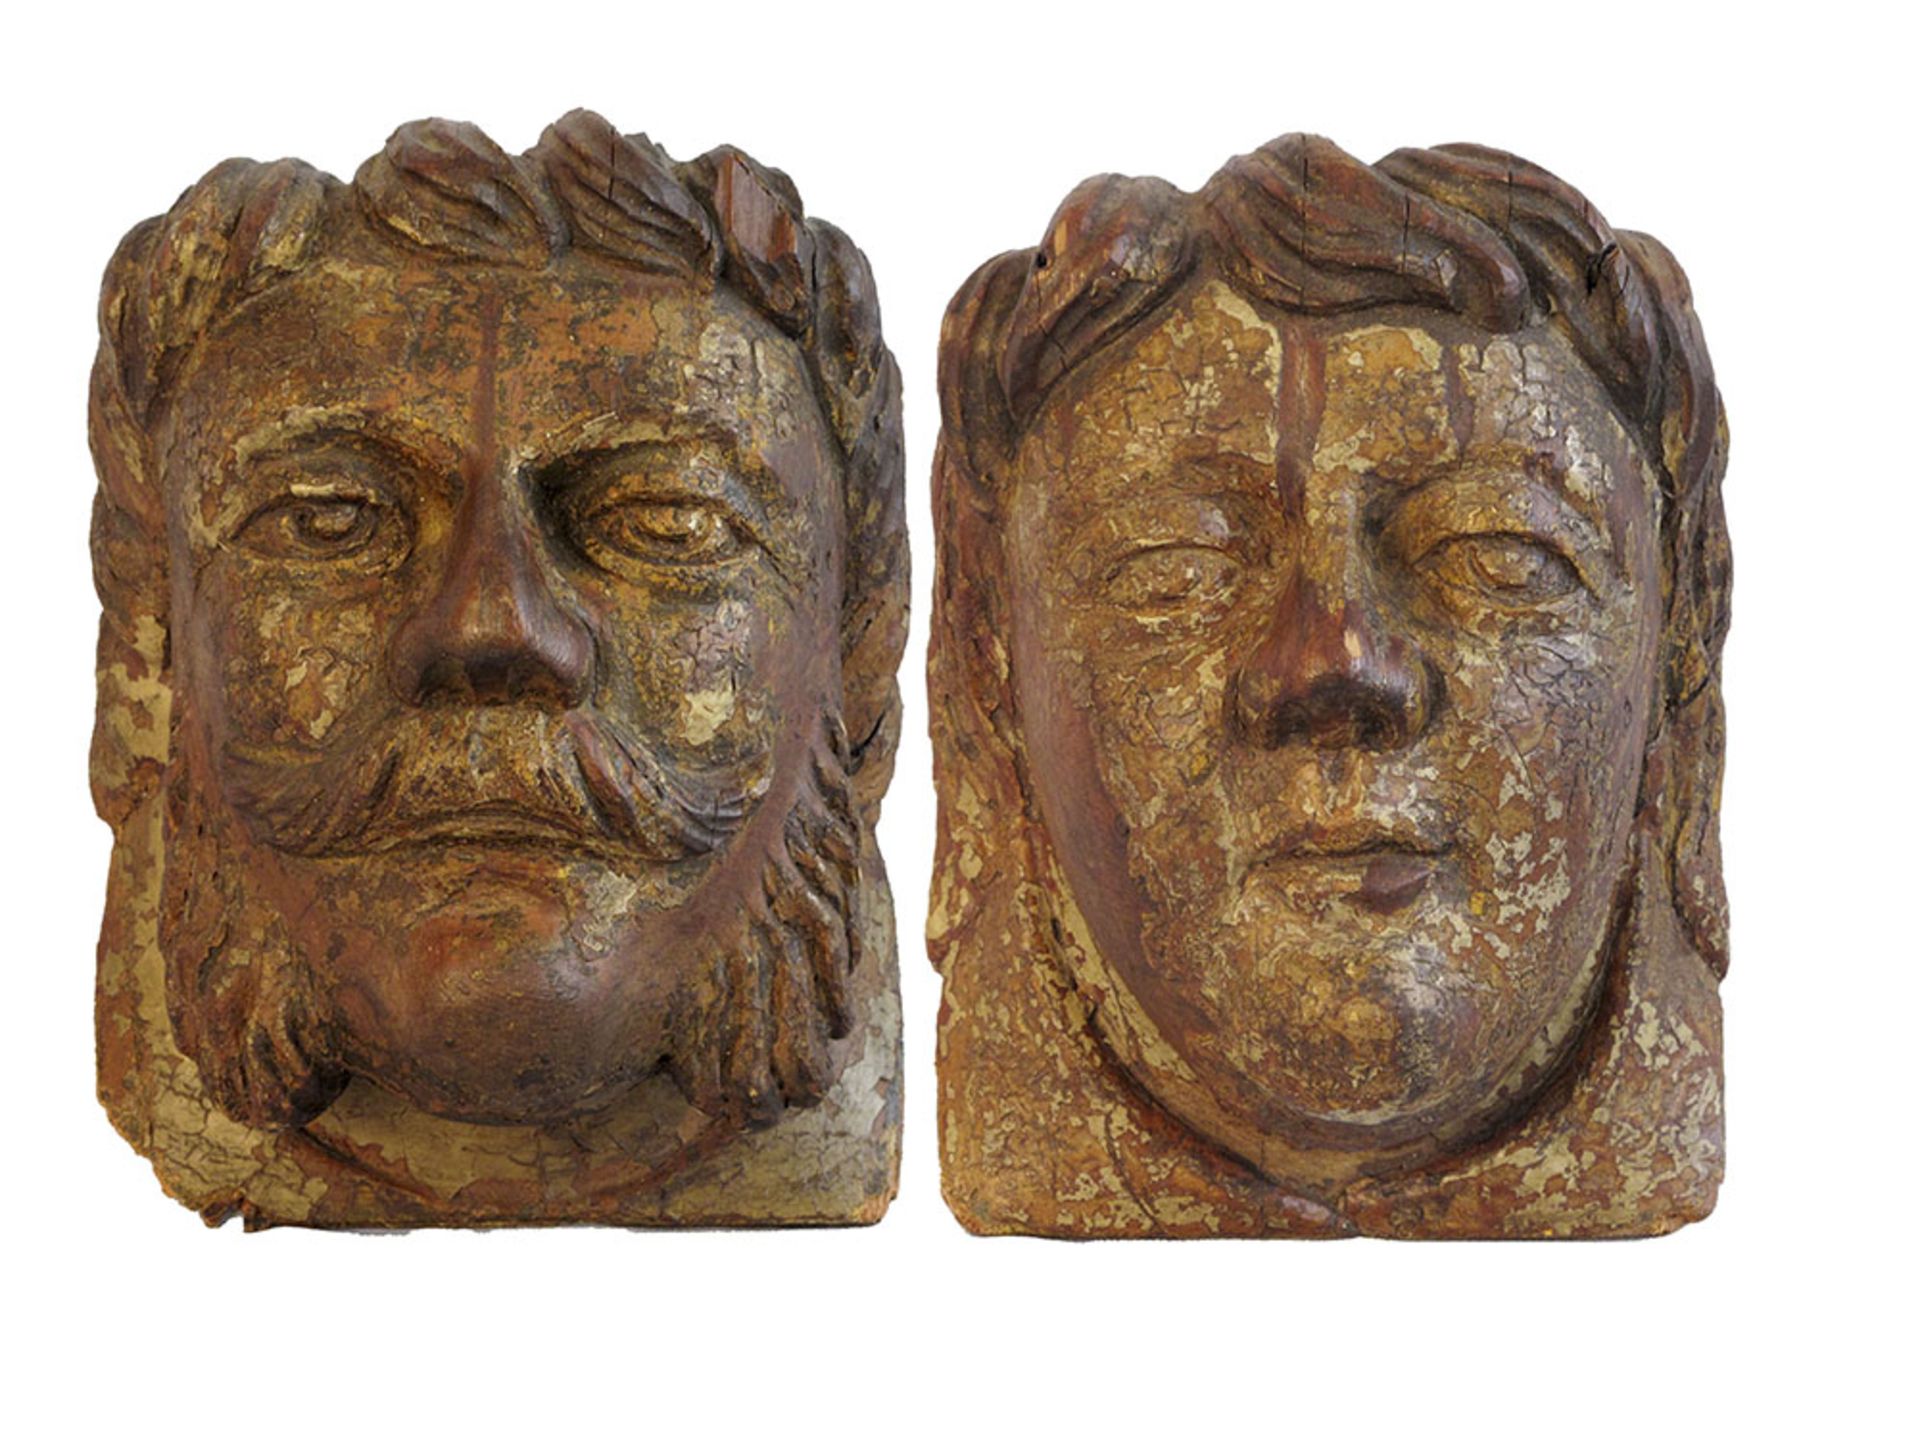 pair of 16/17th Cent. Flemish sculptures in wood with remains of polychromy || VLAANDEREN - 16°/